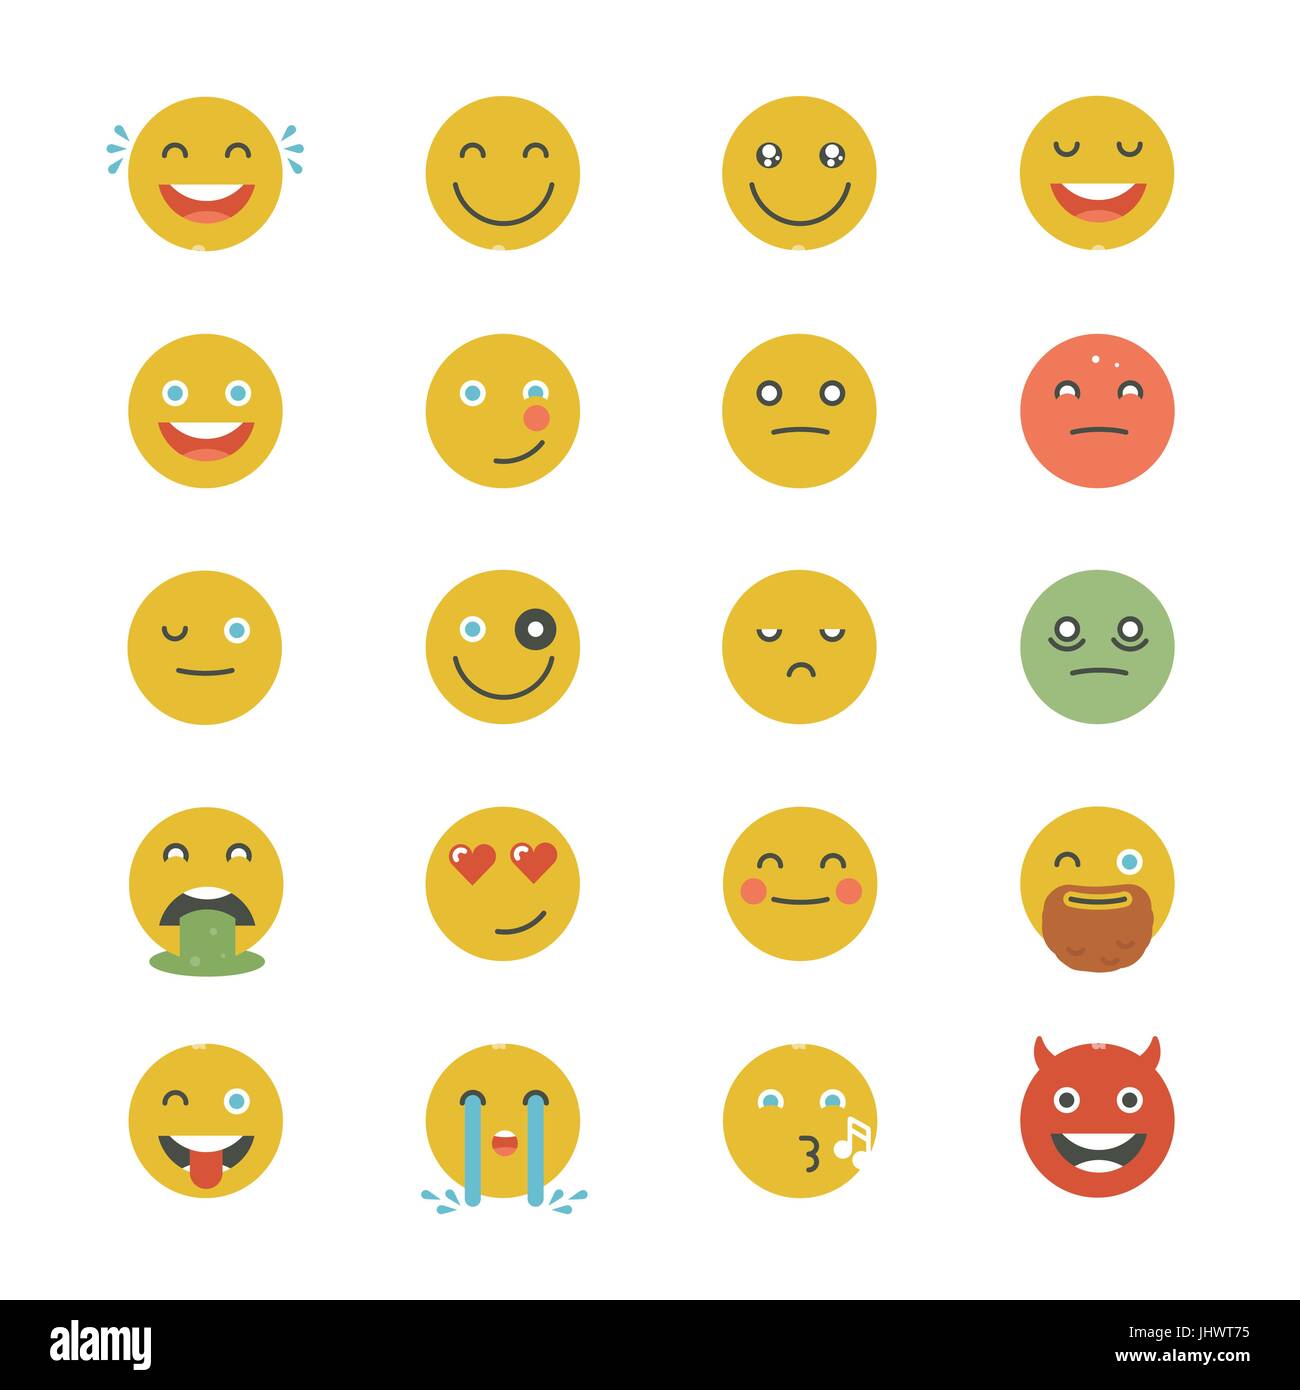 Emoticons Collection. Set of Emoji. Flat monochrome style. Different Emoticons. Vector smile face icons. Stock Vector